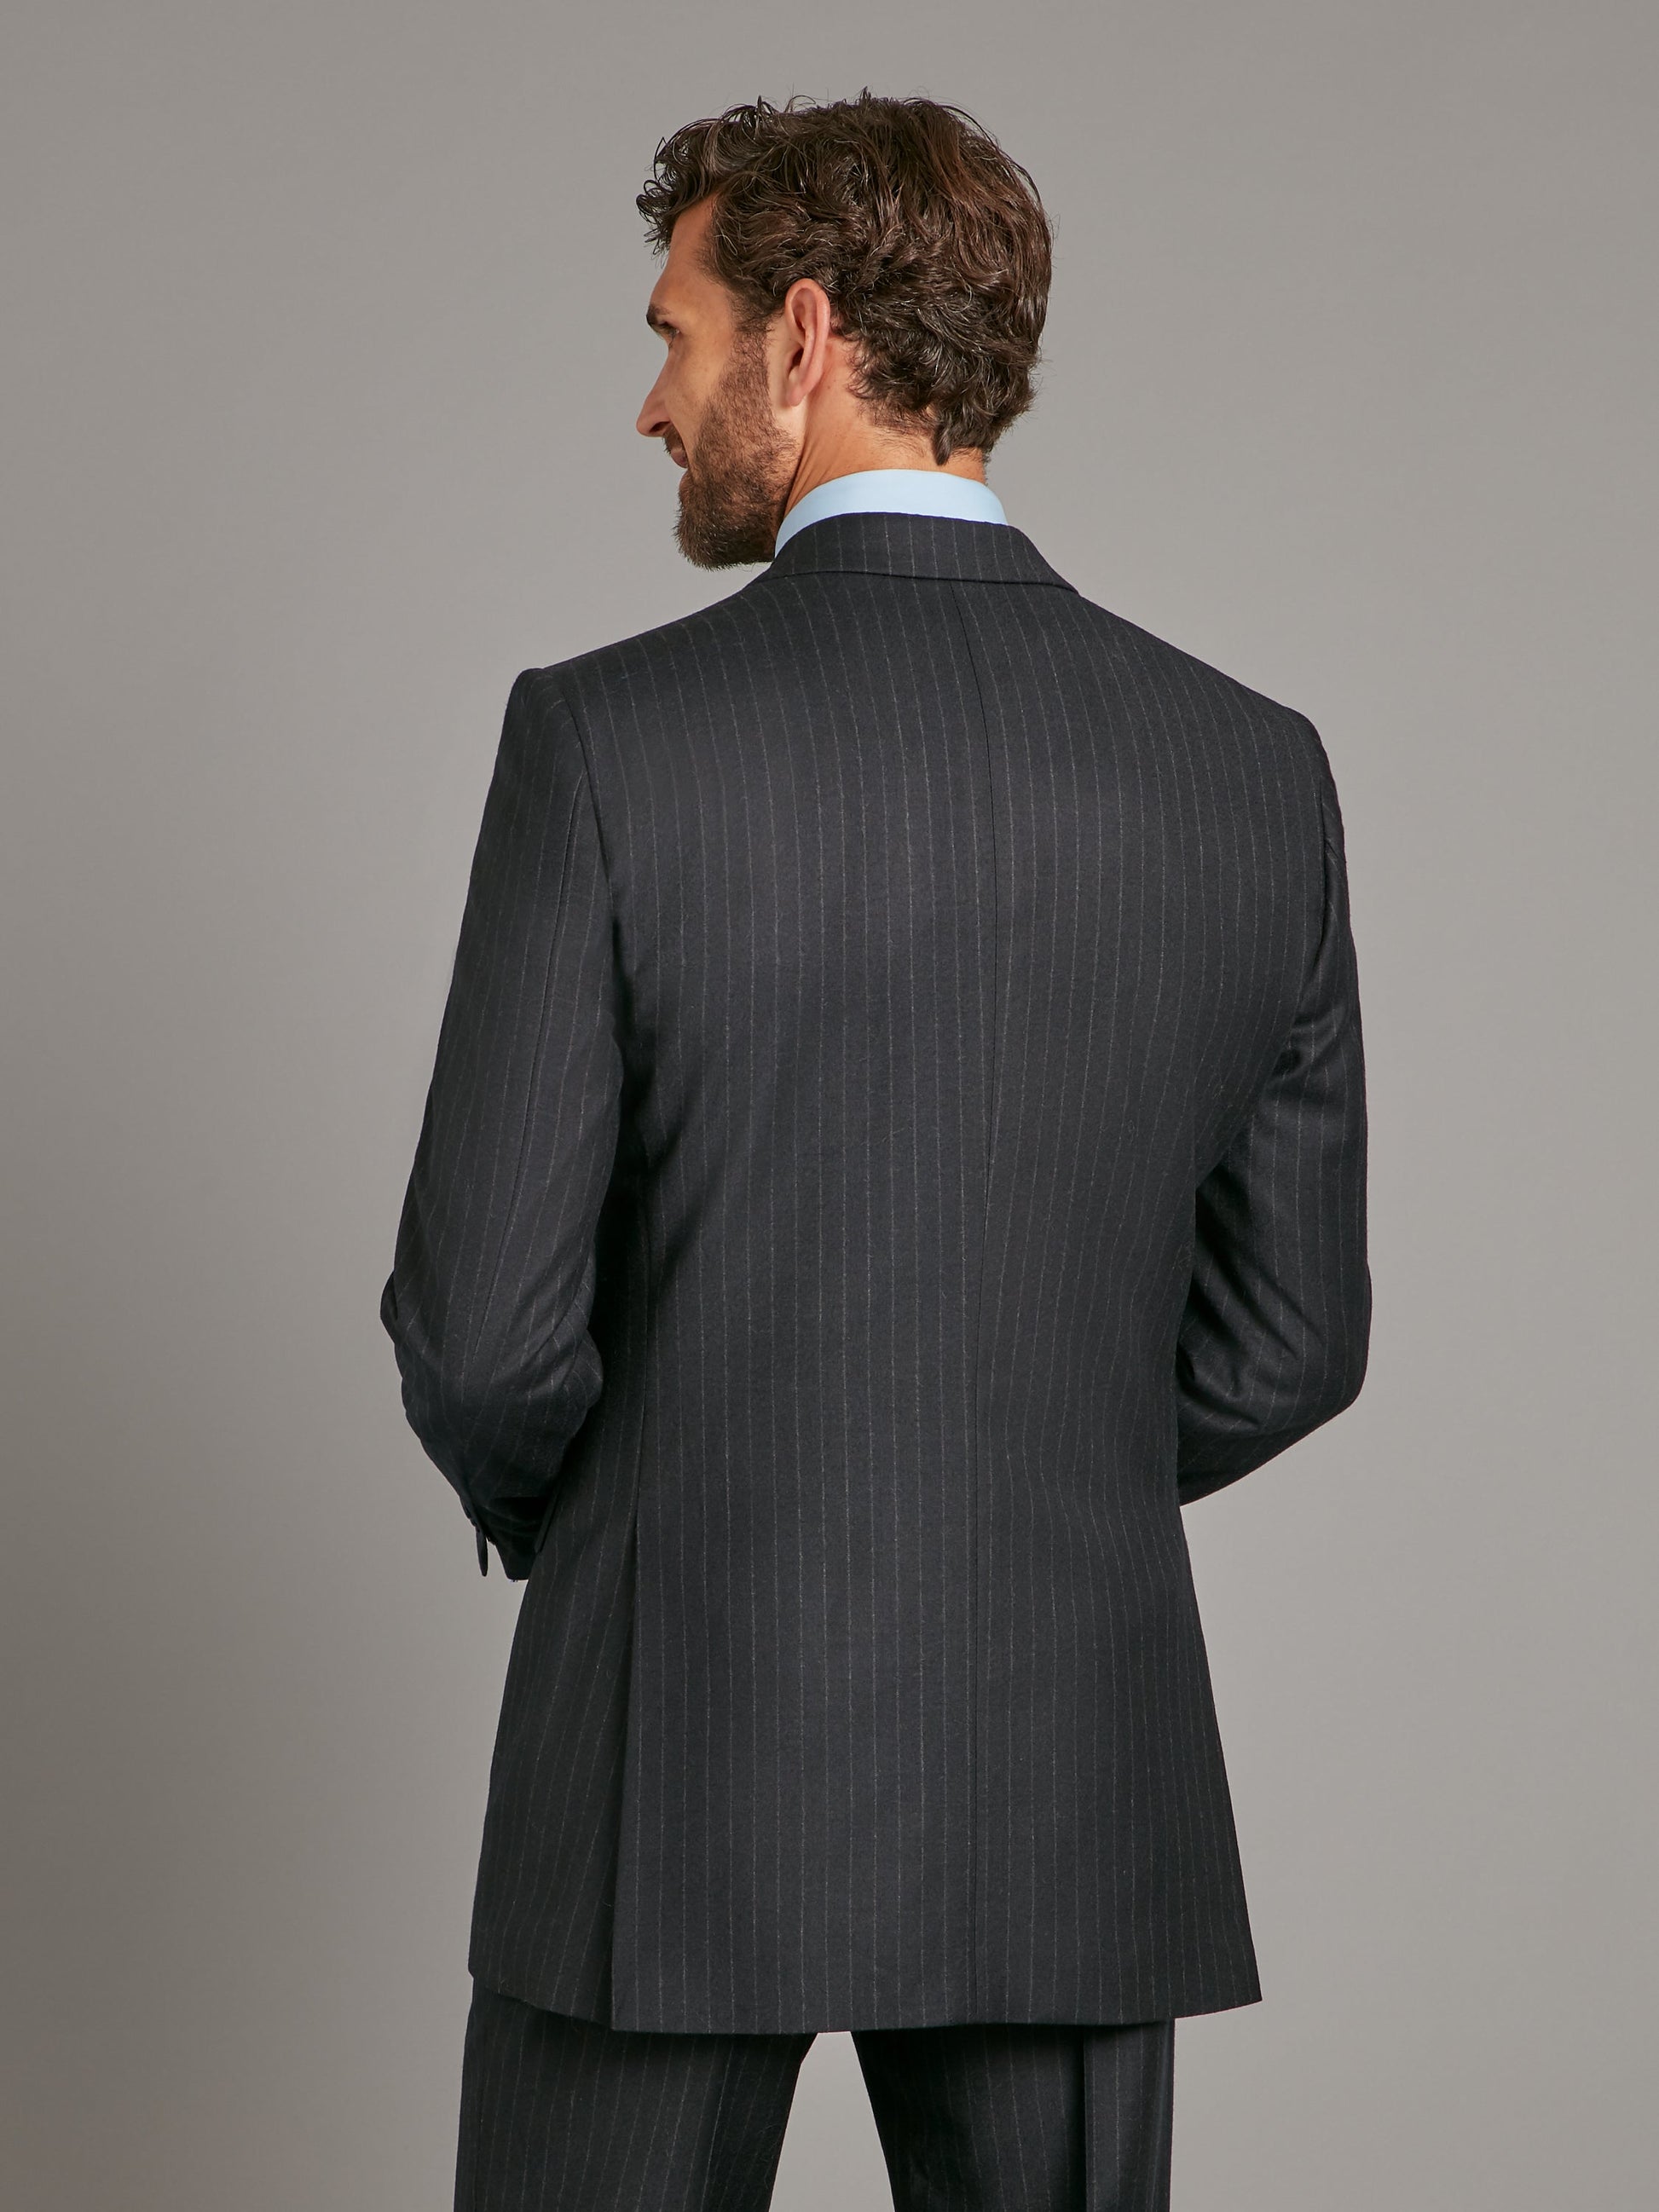 carlyle suit chalk stripe flannel navy 4